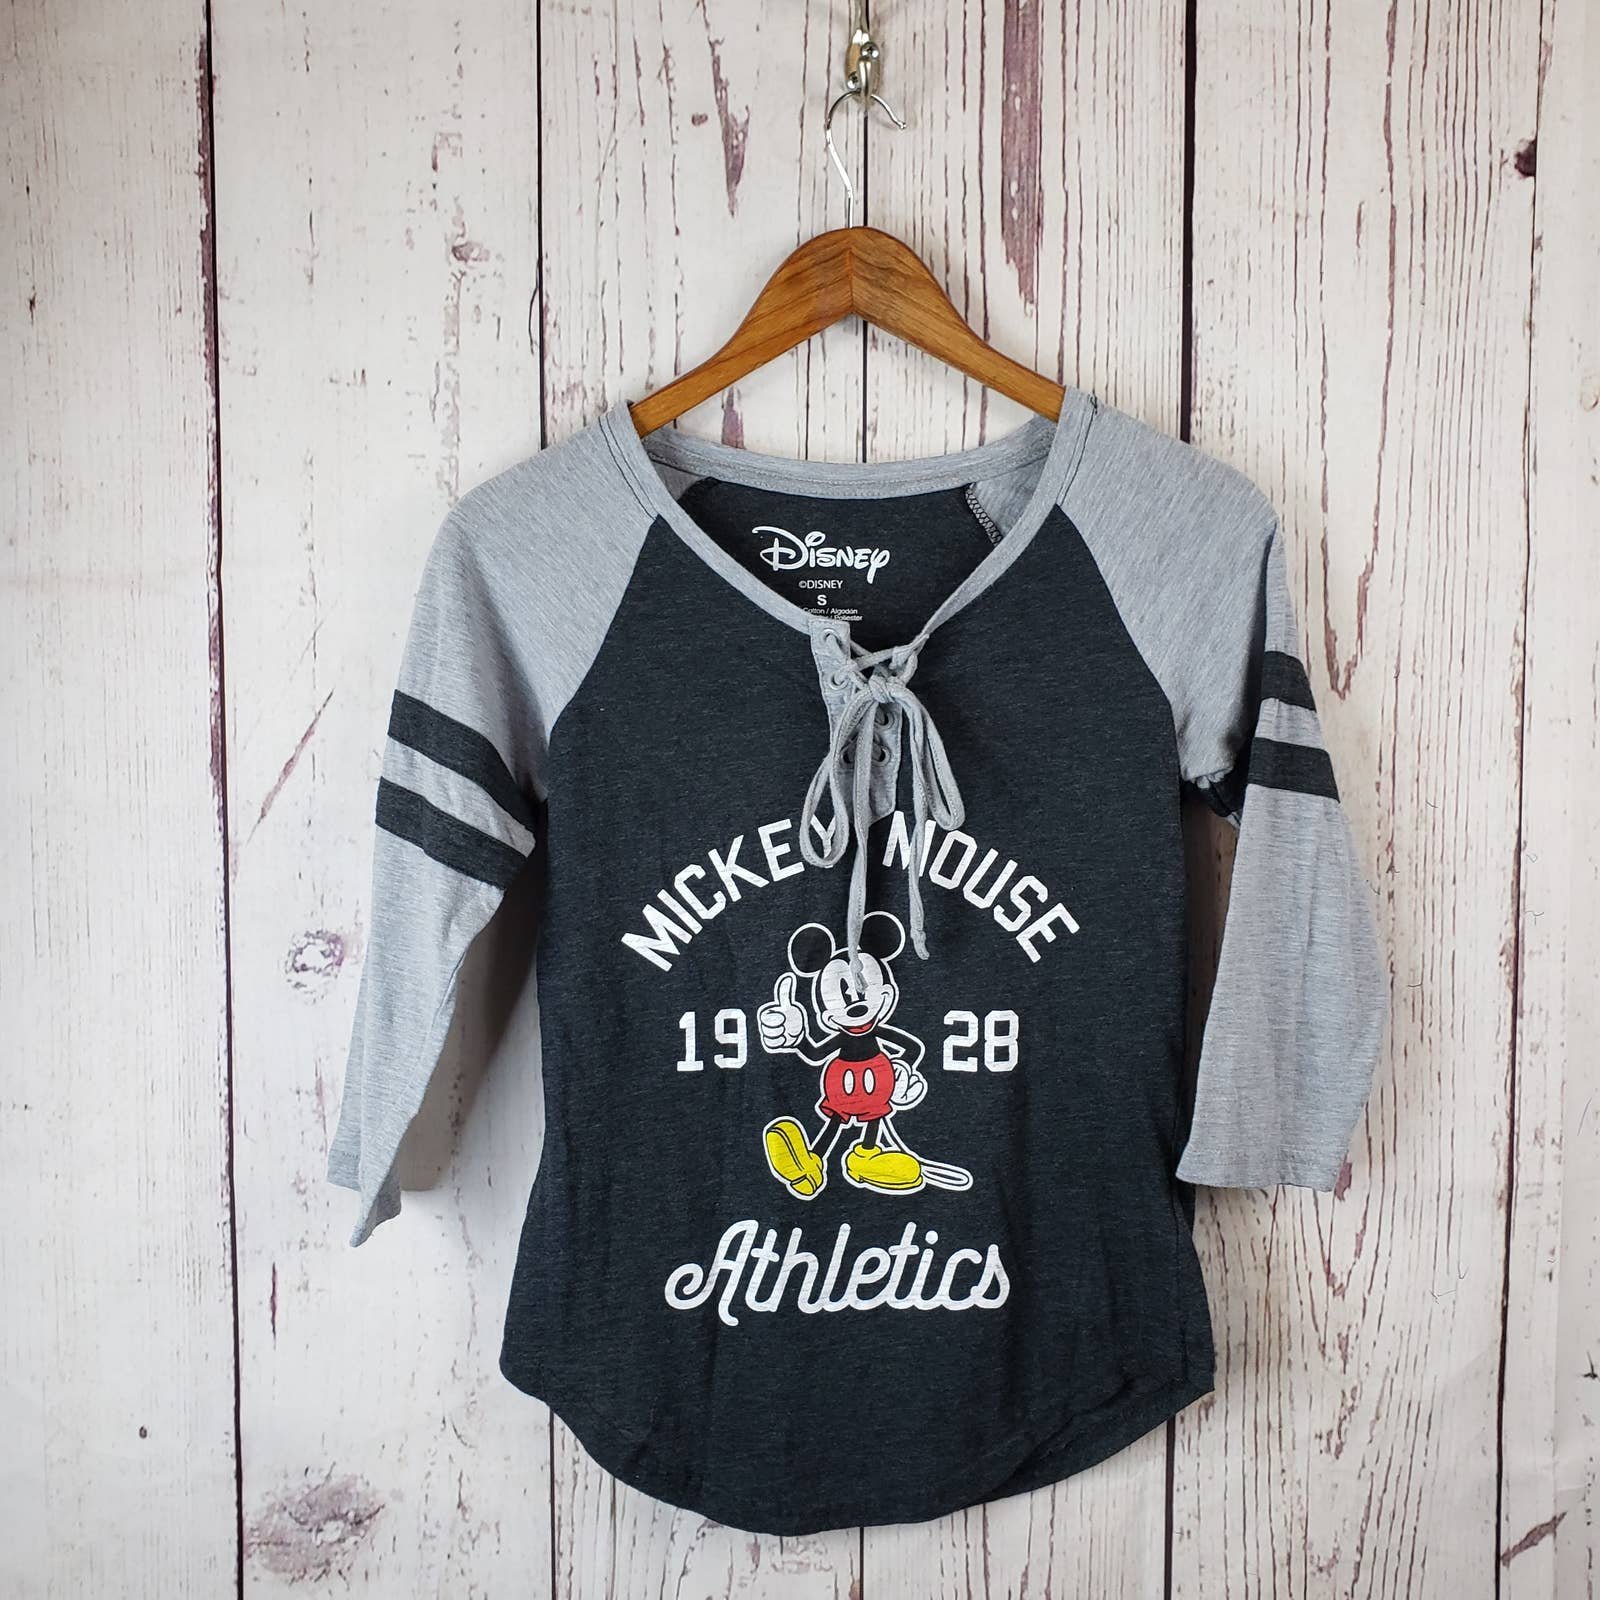 cheapest place to buy  Disney Mickey Mouse Athletics T 